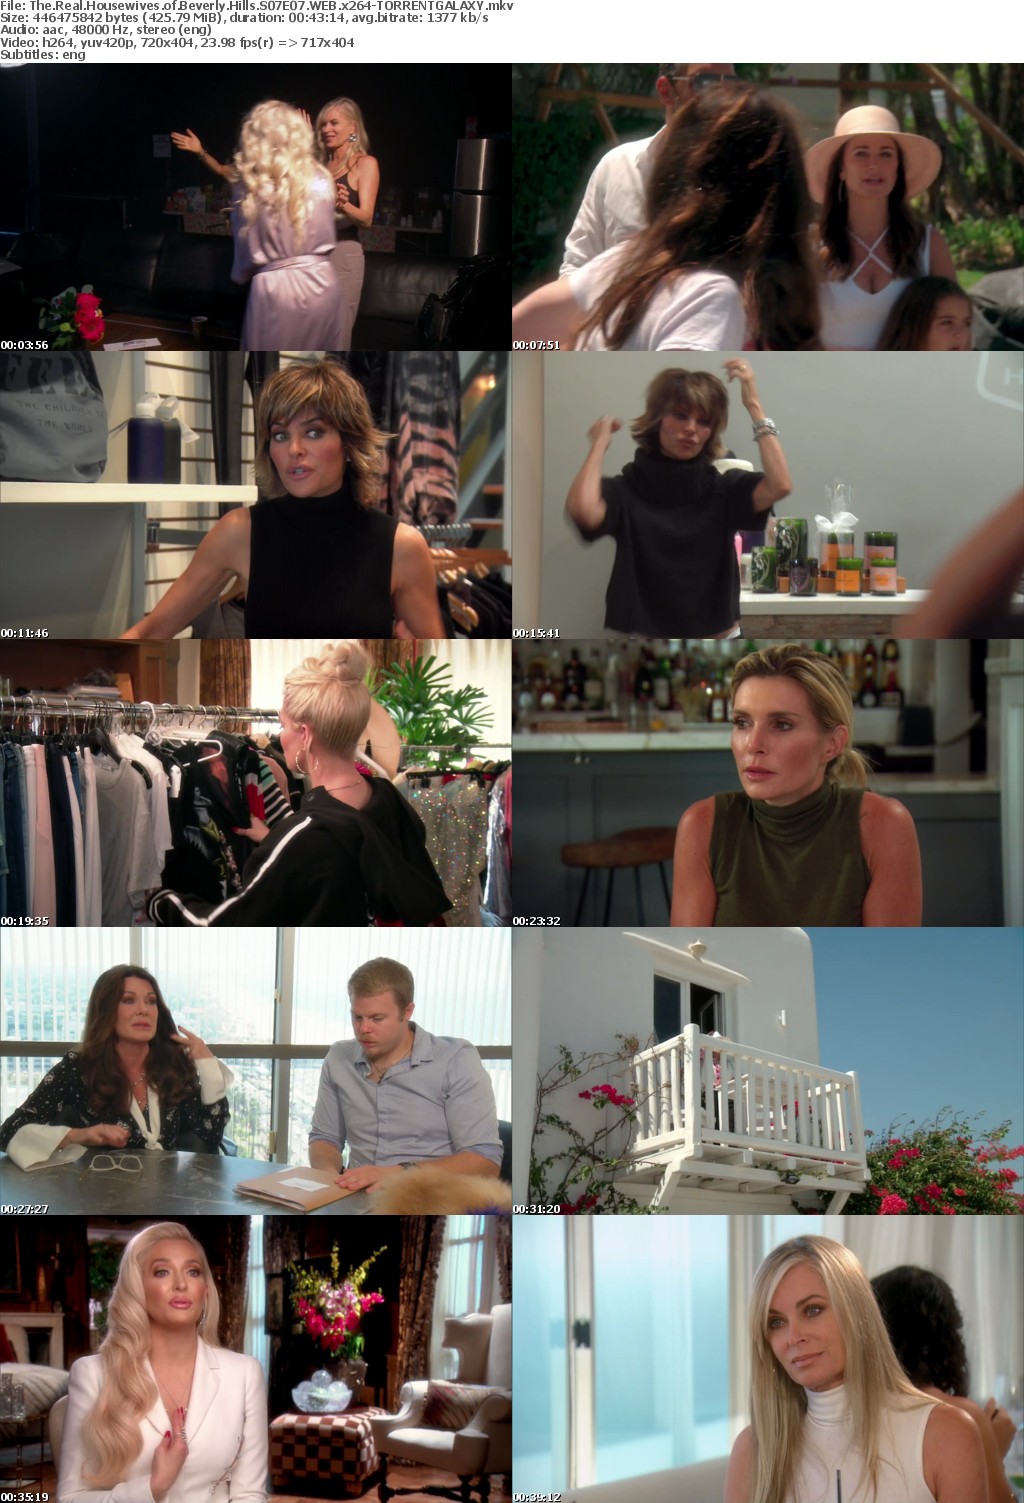 The Real Housewives of Beverly Hills S07E07 WEB x264-GALAXY